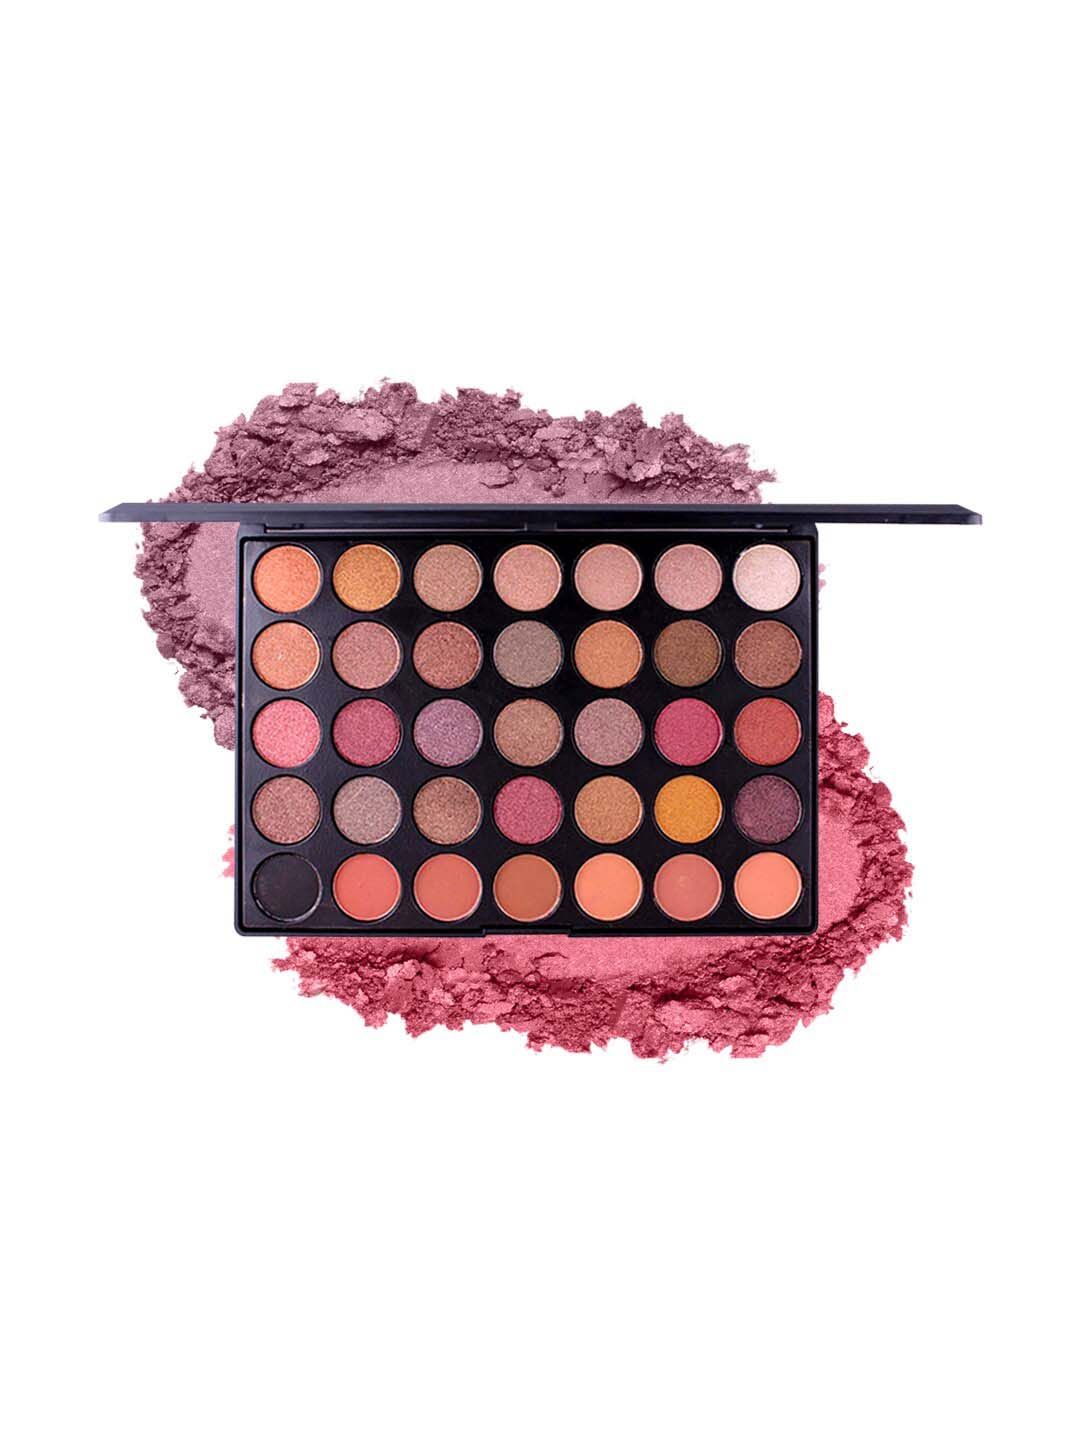 MISS ROSE 35 Color Matte Professional Eyeshadow Palette 7001-81 NT2 Price in India